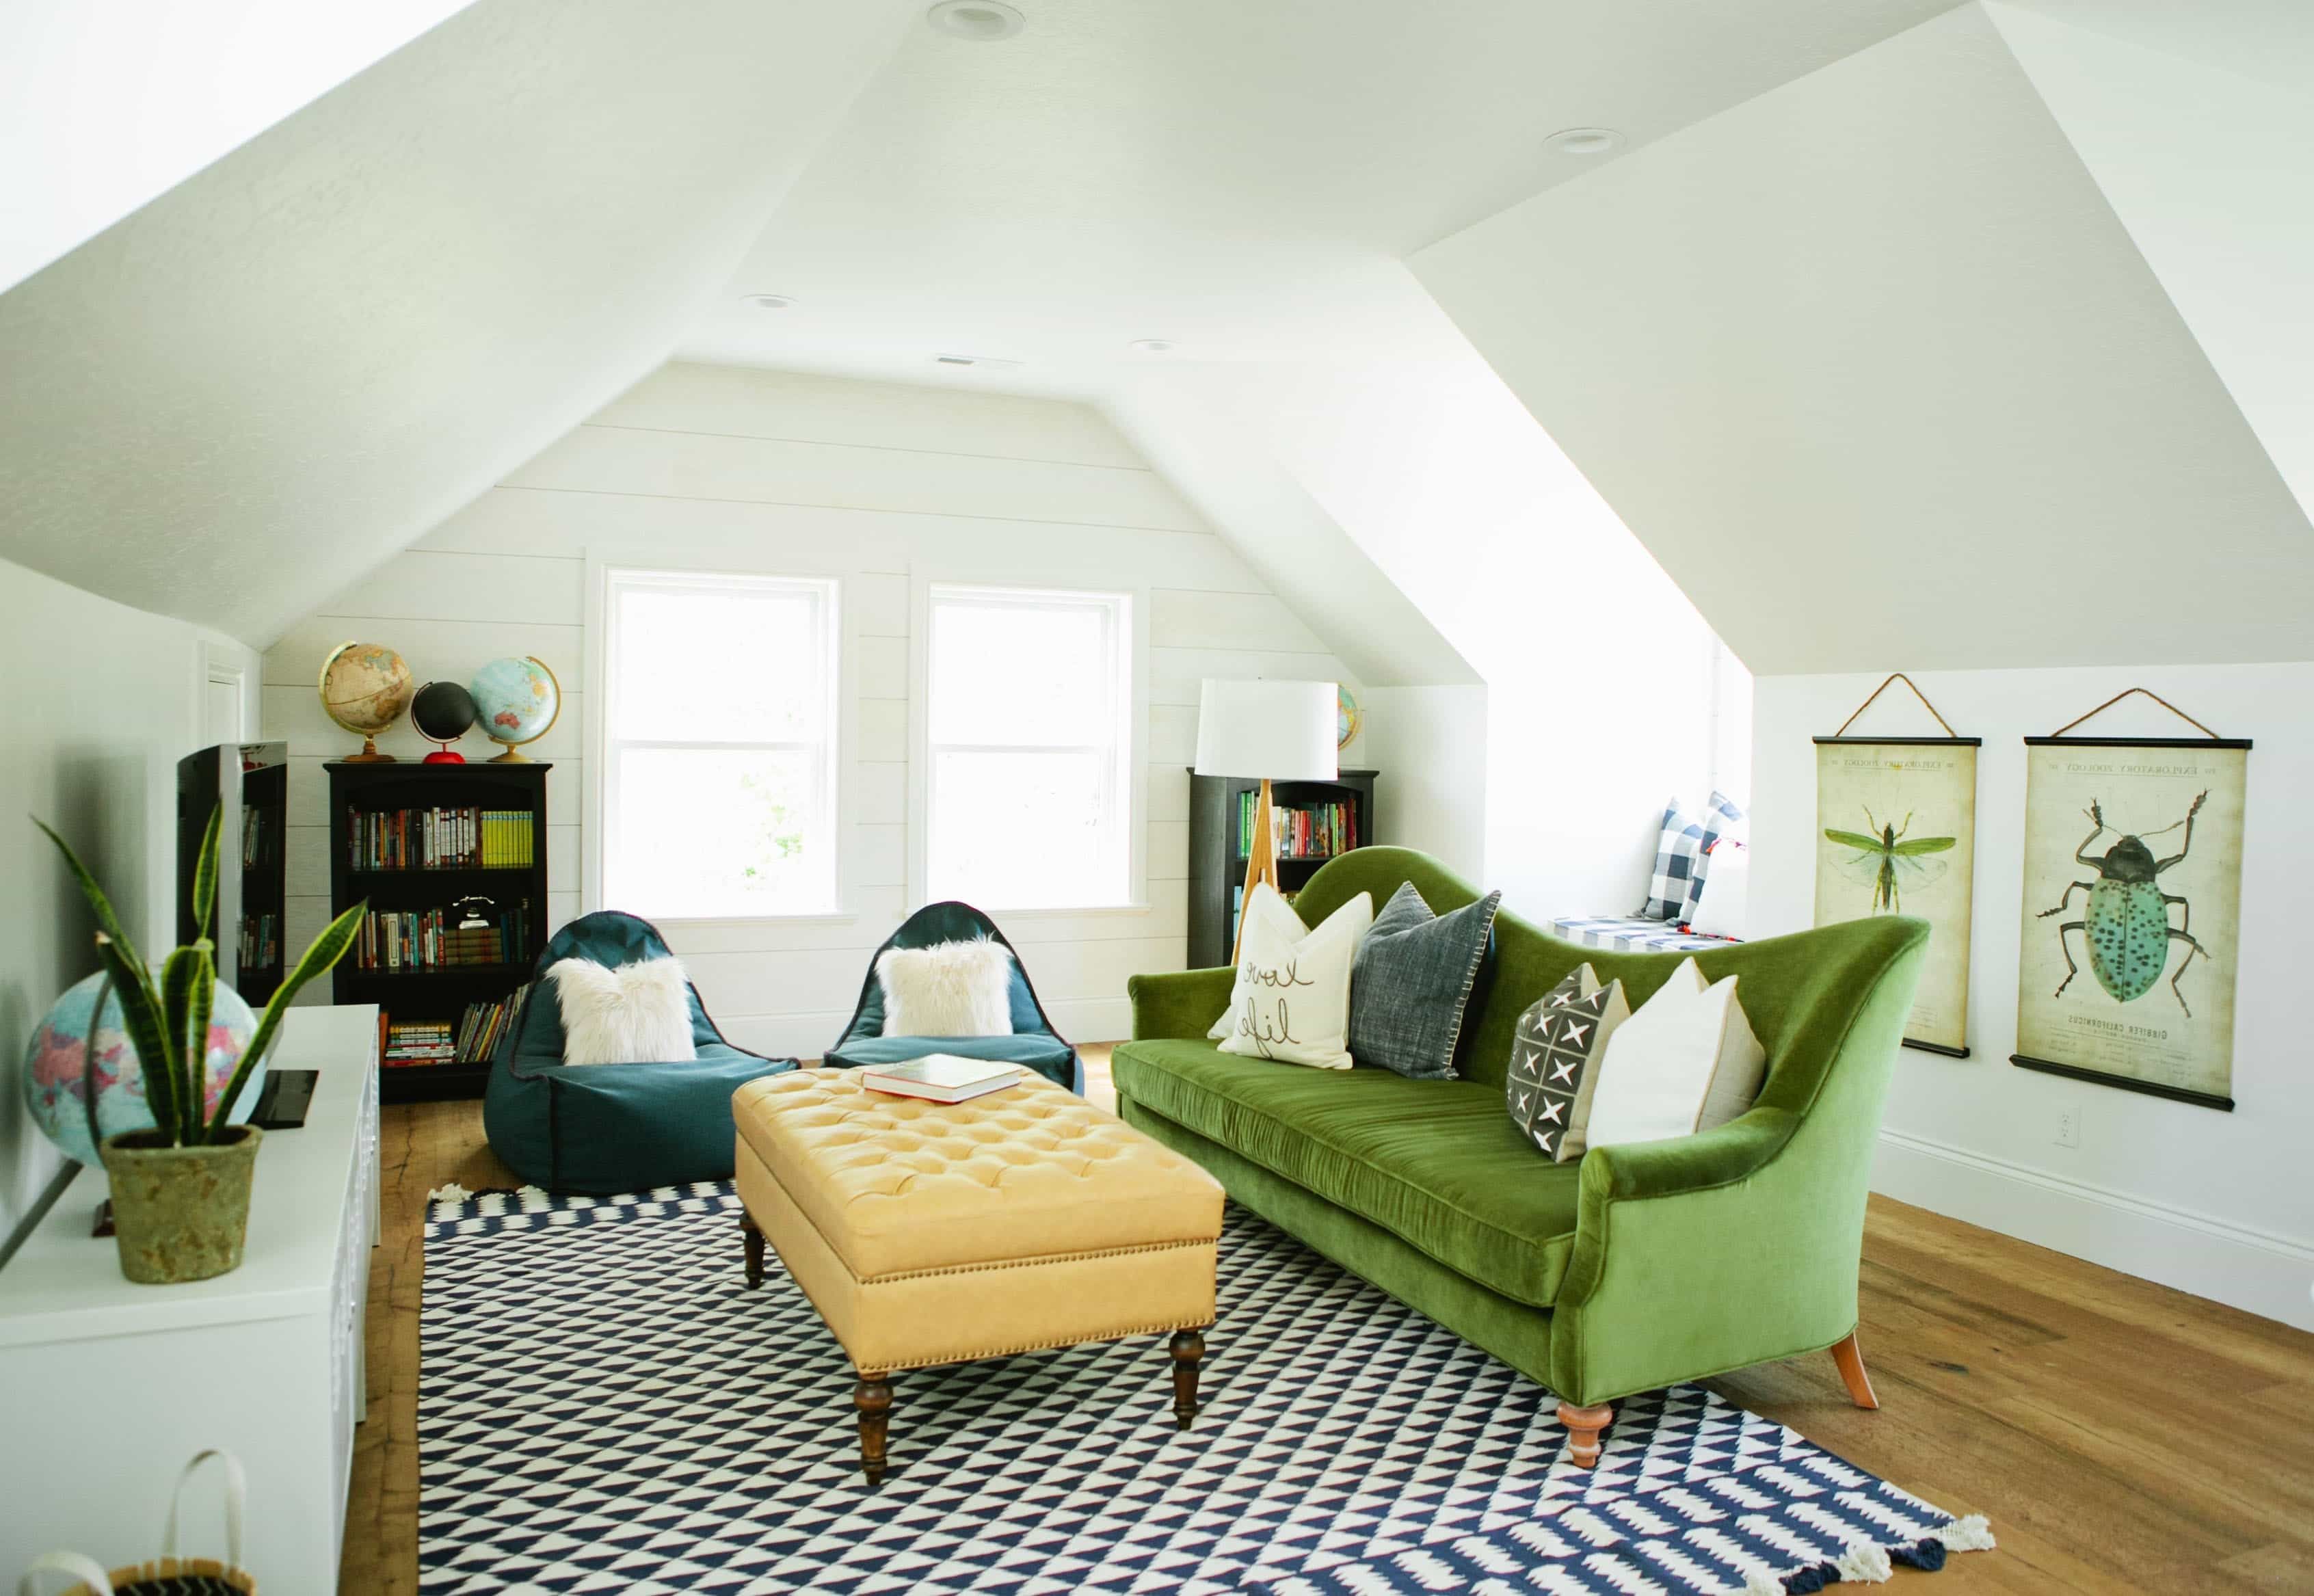 Cozy Attic Living Room Design With Warm Royal Sofa In Green Color And Black White Carpet Rug (View 9 of 31)